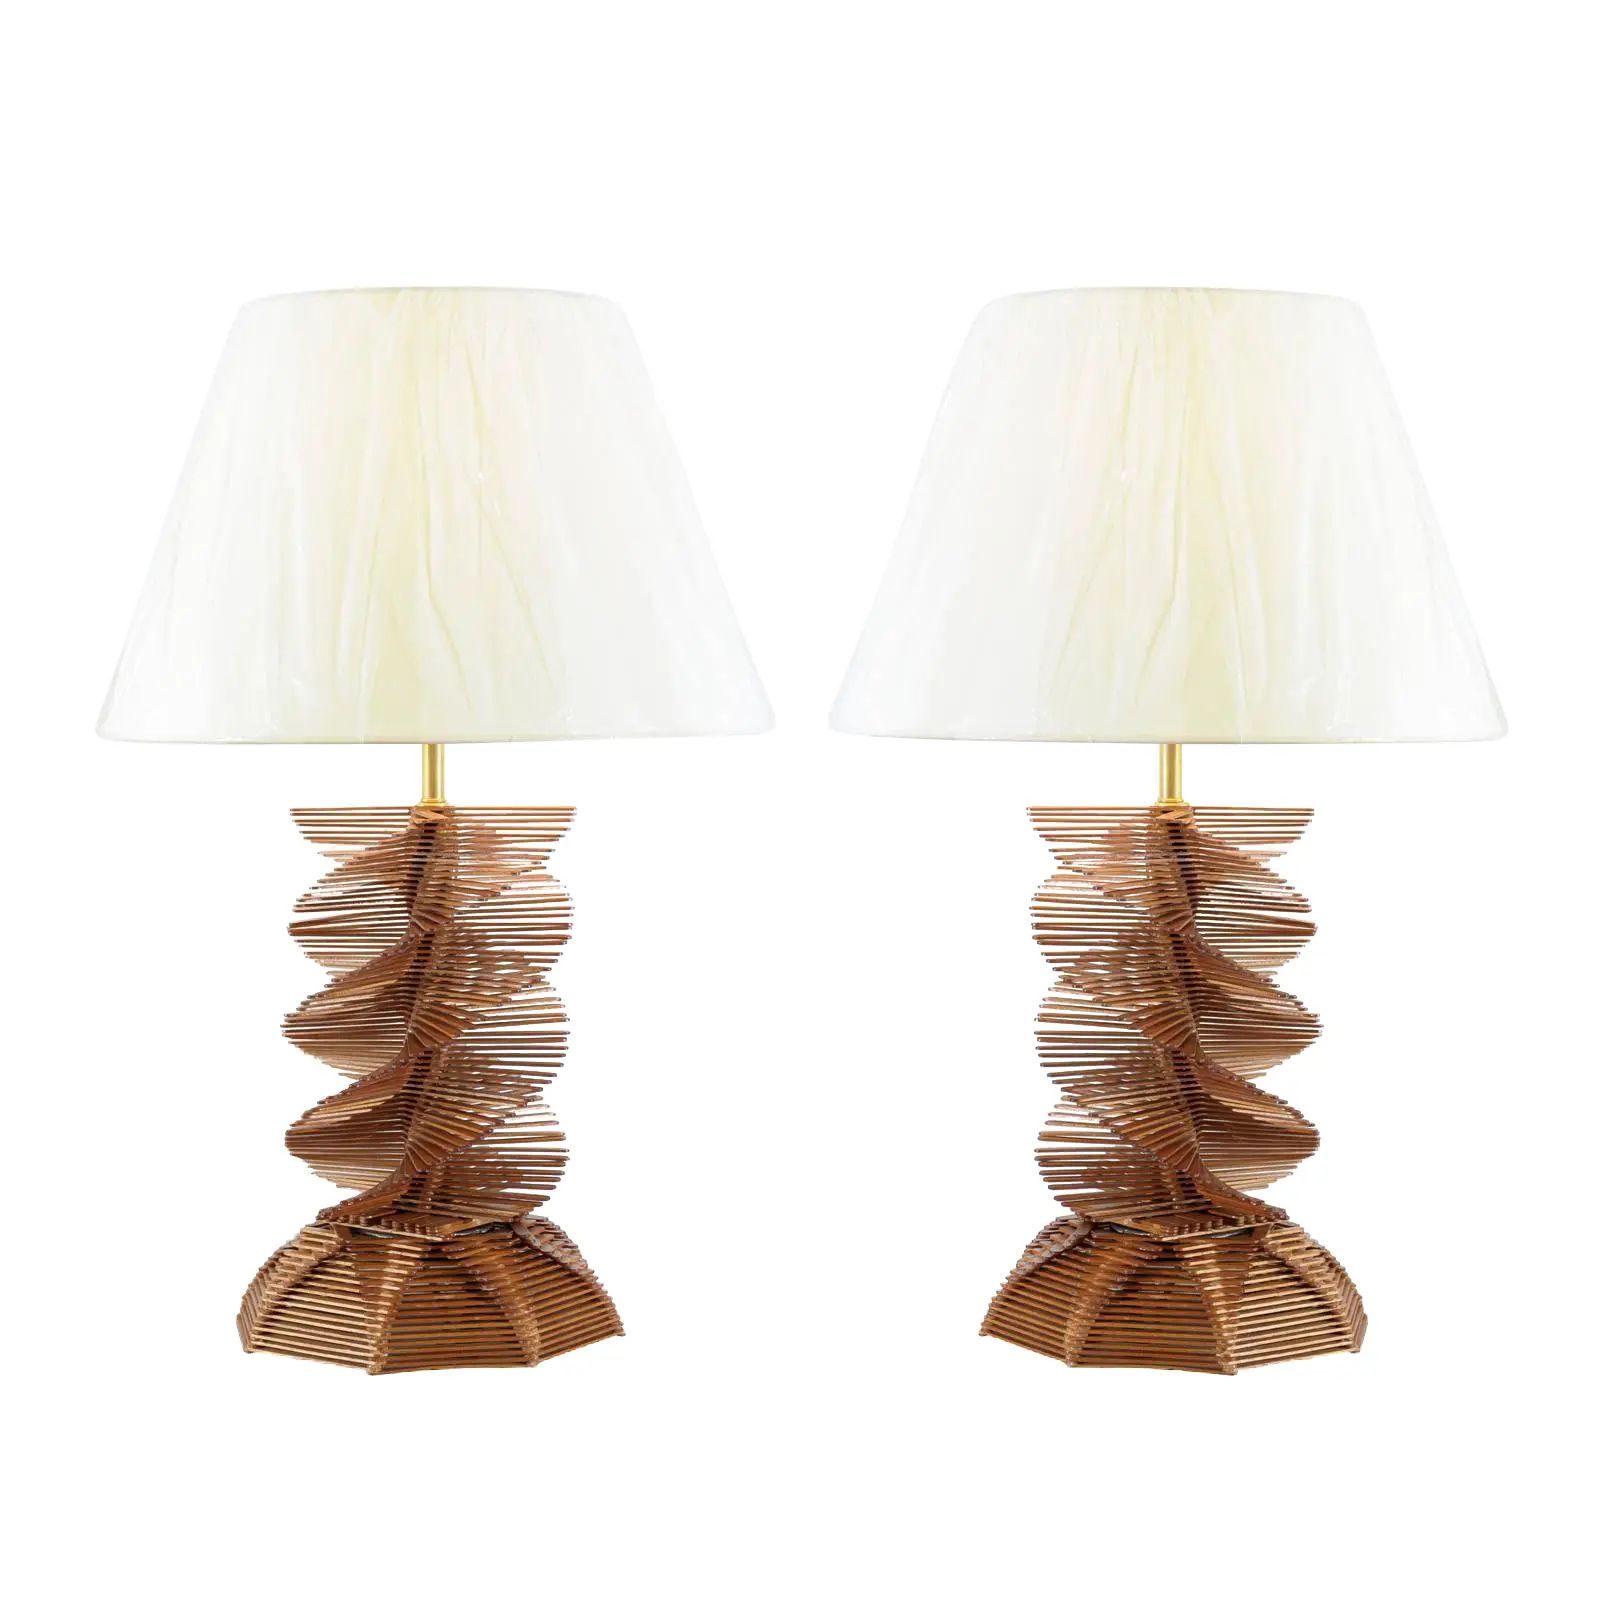 Restored Vintage Popsicle Stick Helix Lamps - a Pair | Chairish